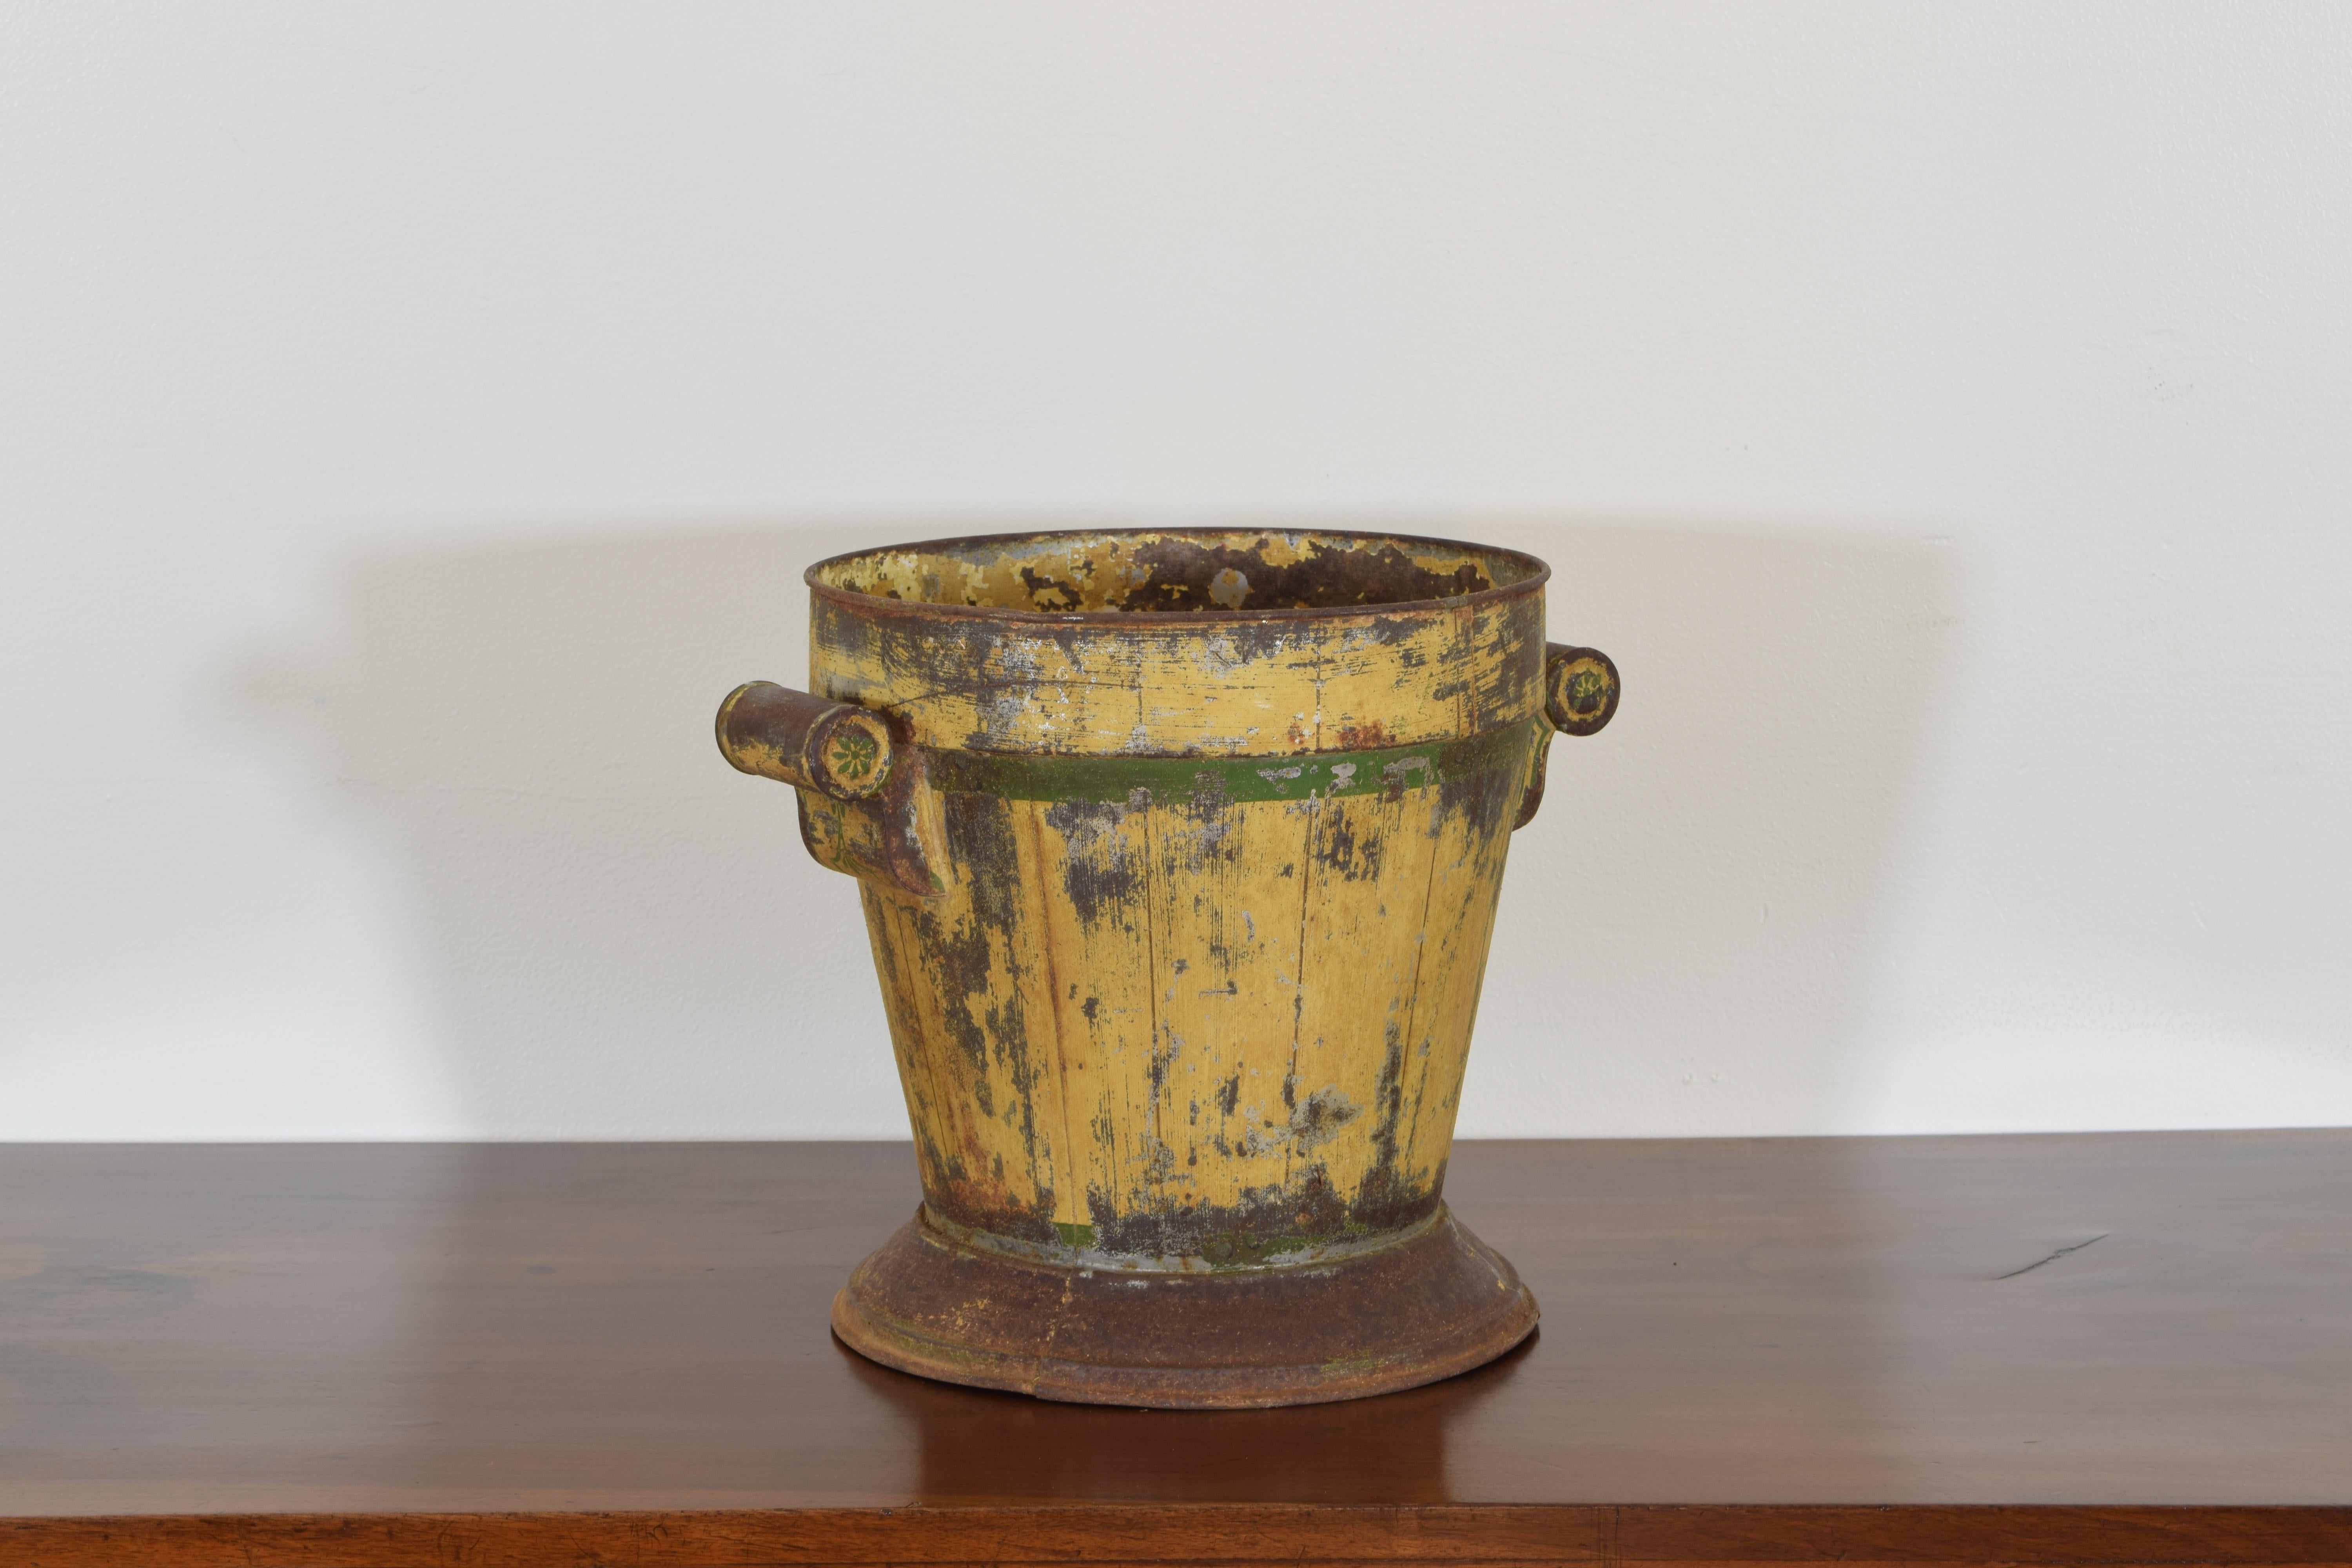 In the neoclassical taste with yellow and green painted tole surfaces, the tapering body surmounted atop a plinth base and having rounded handles, the interior with the original pierced liner, the bottom rusted open in areas.